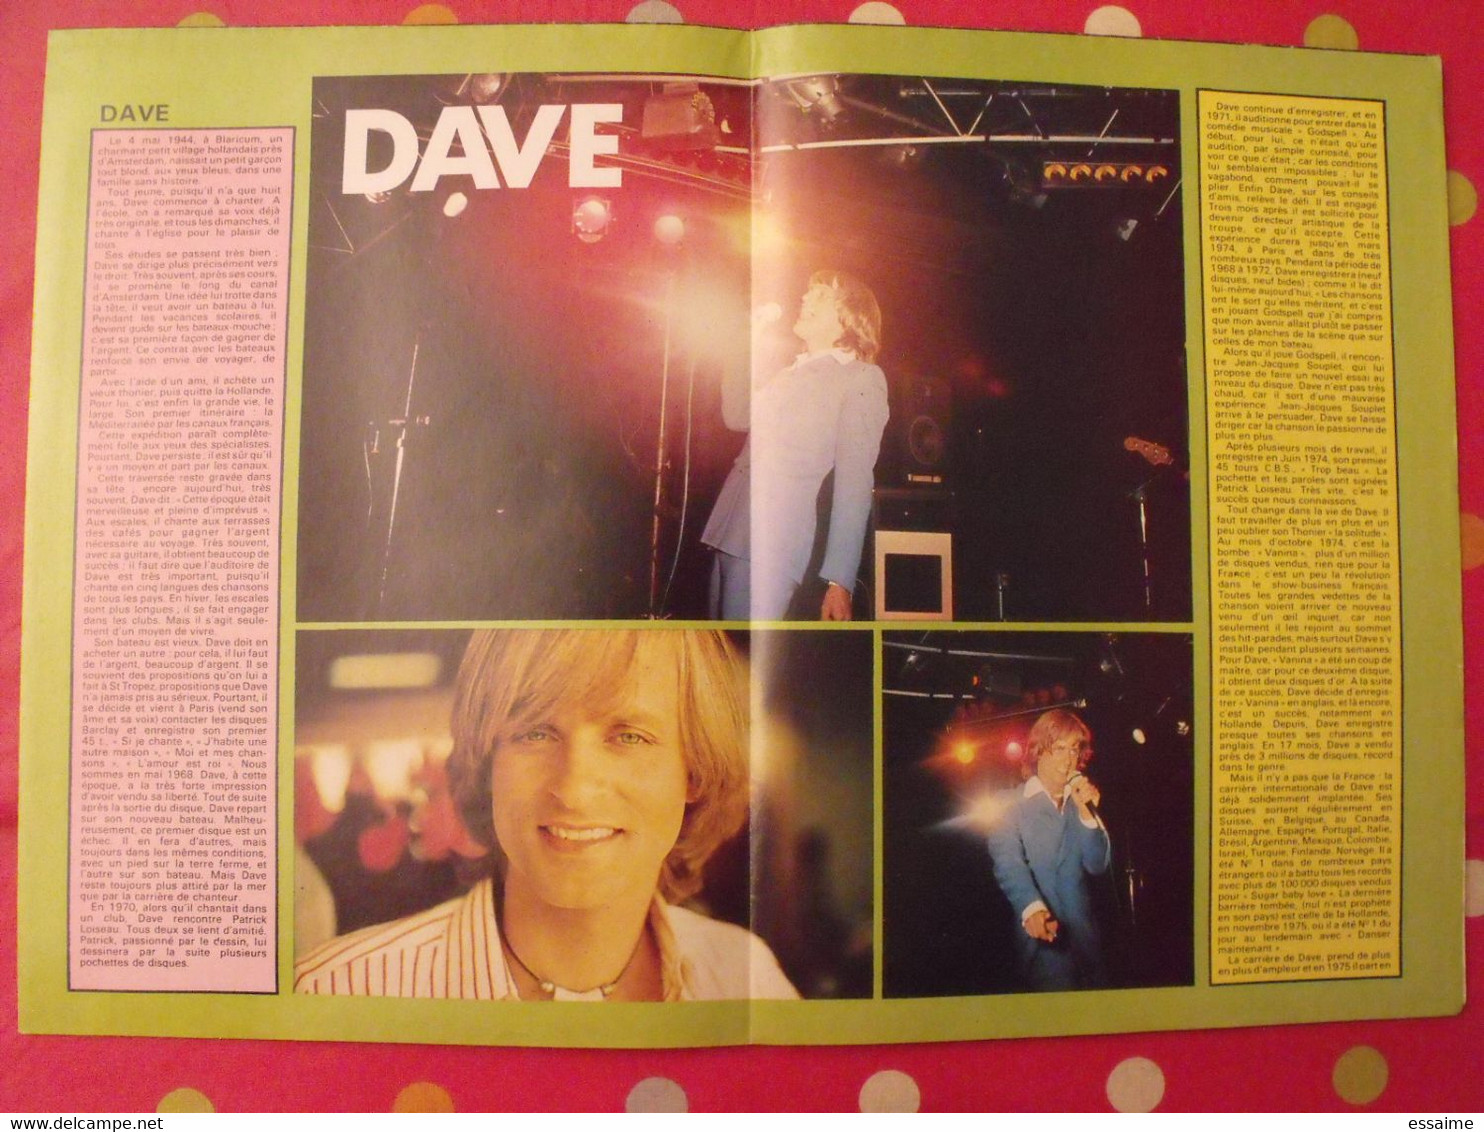 poster select n° 4 spécial Dave. vers 1975.